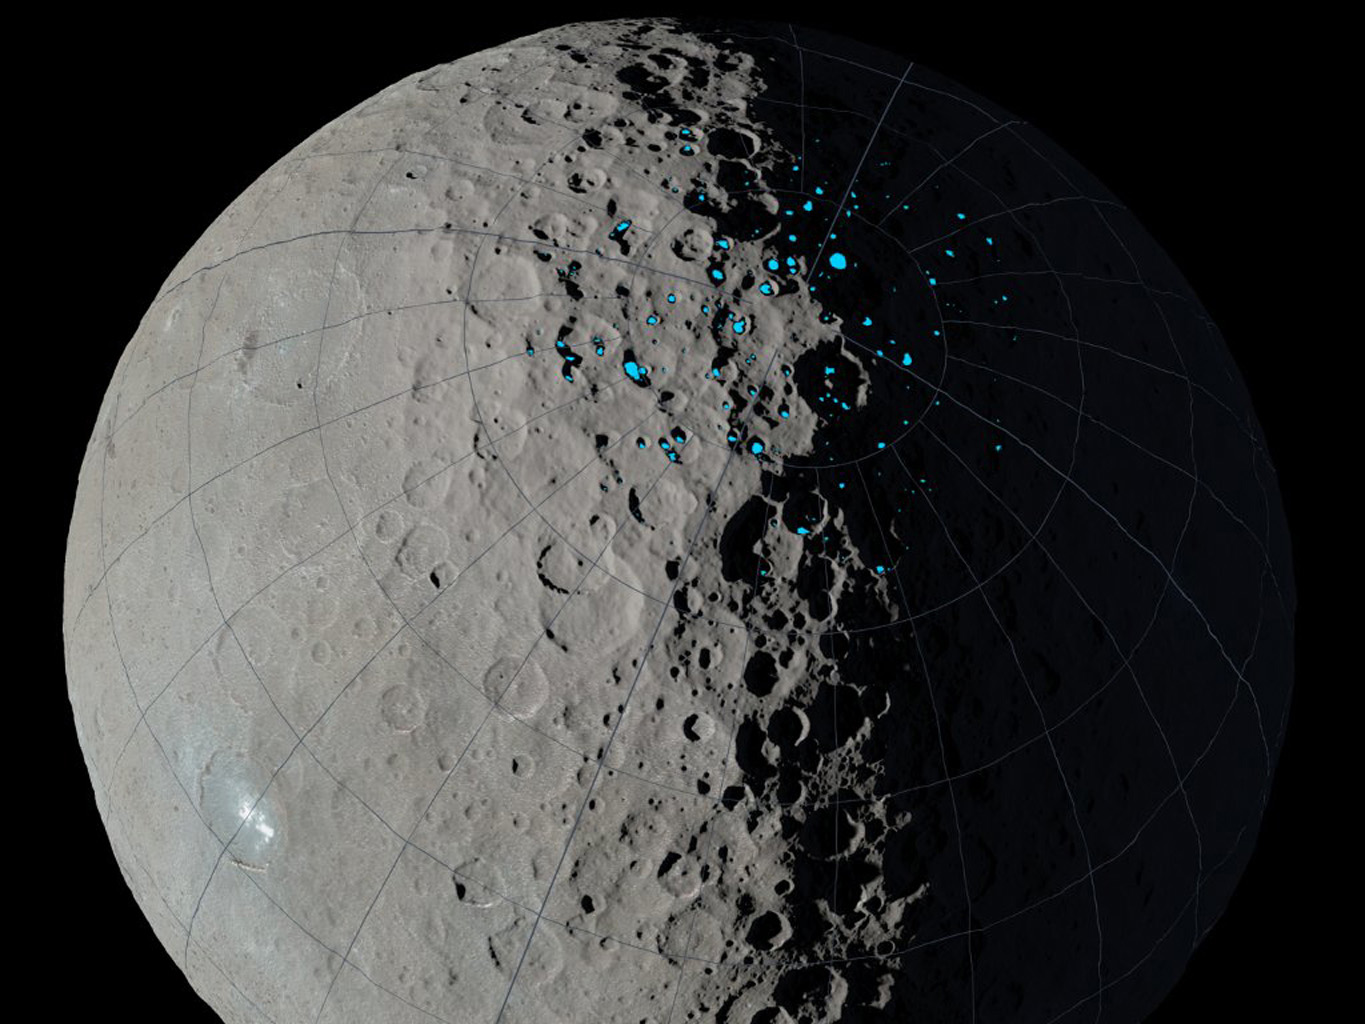 Shadowed Craters on Ceres